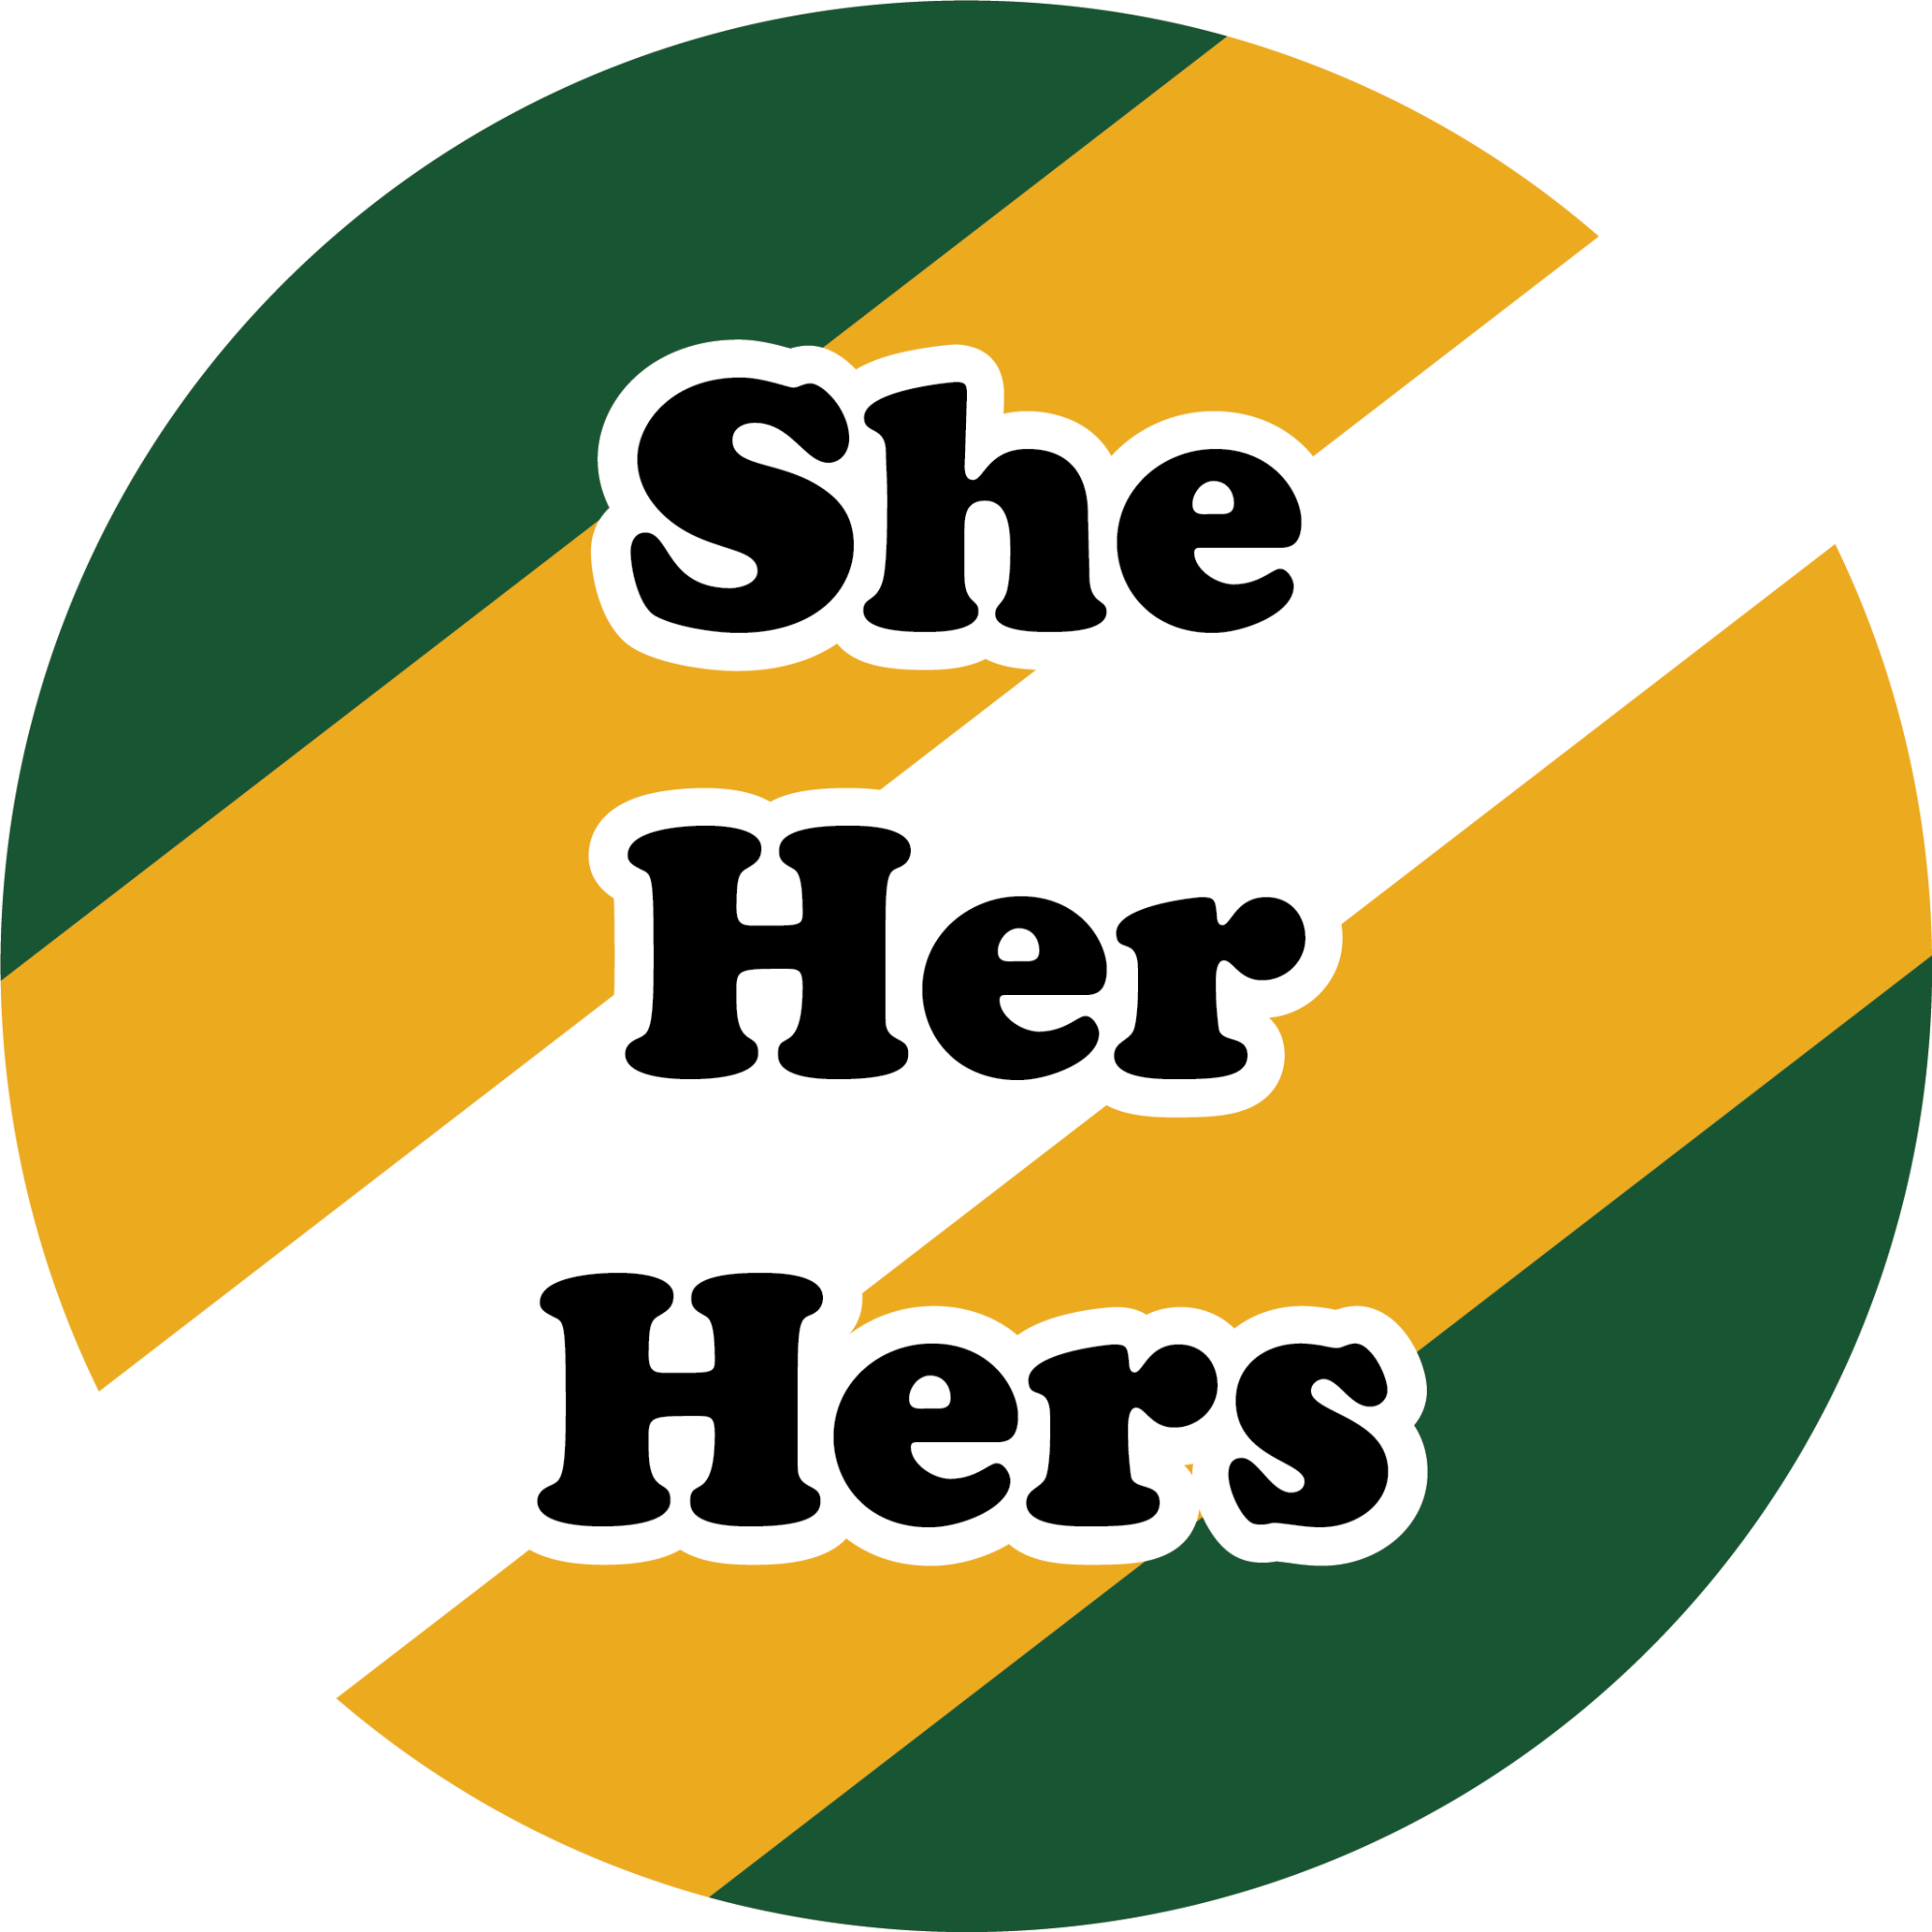 She Her Hers on a green, gold, and white striped background